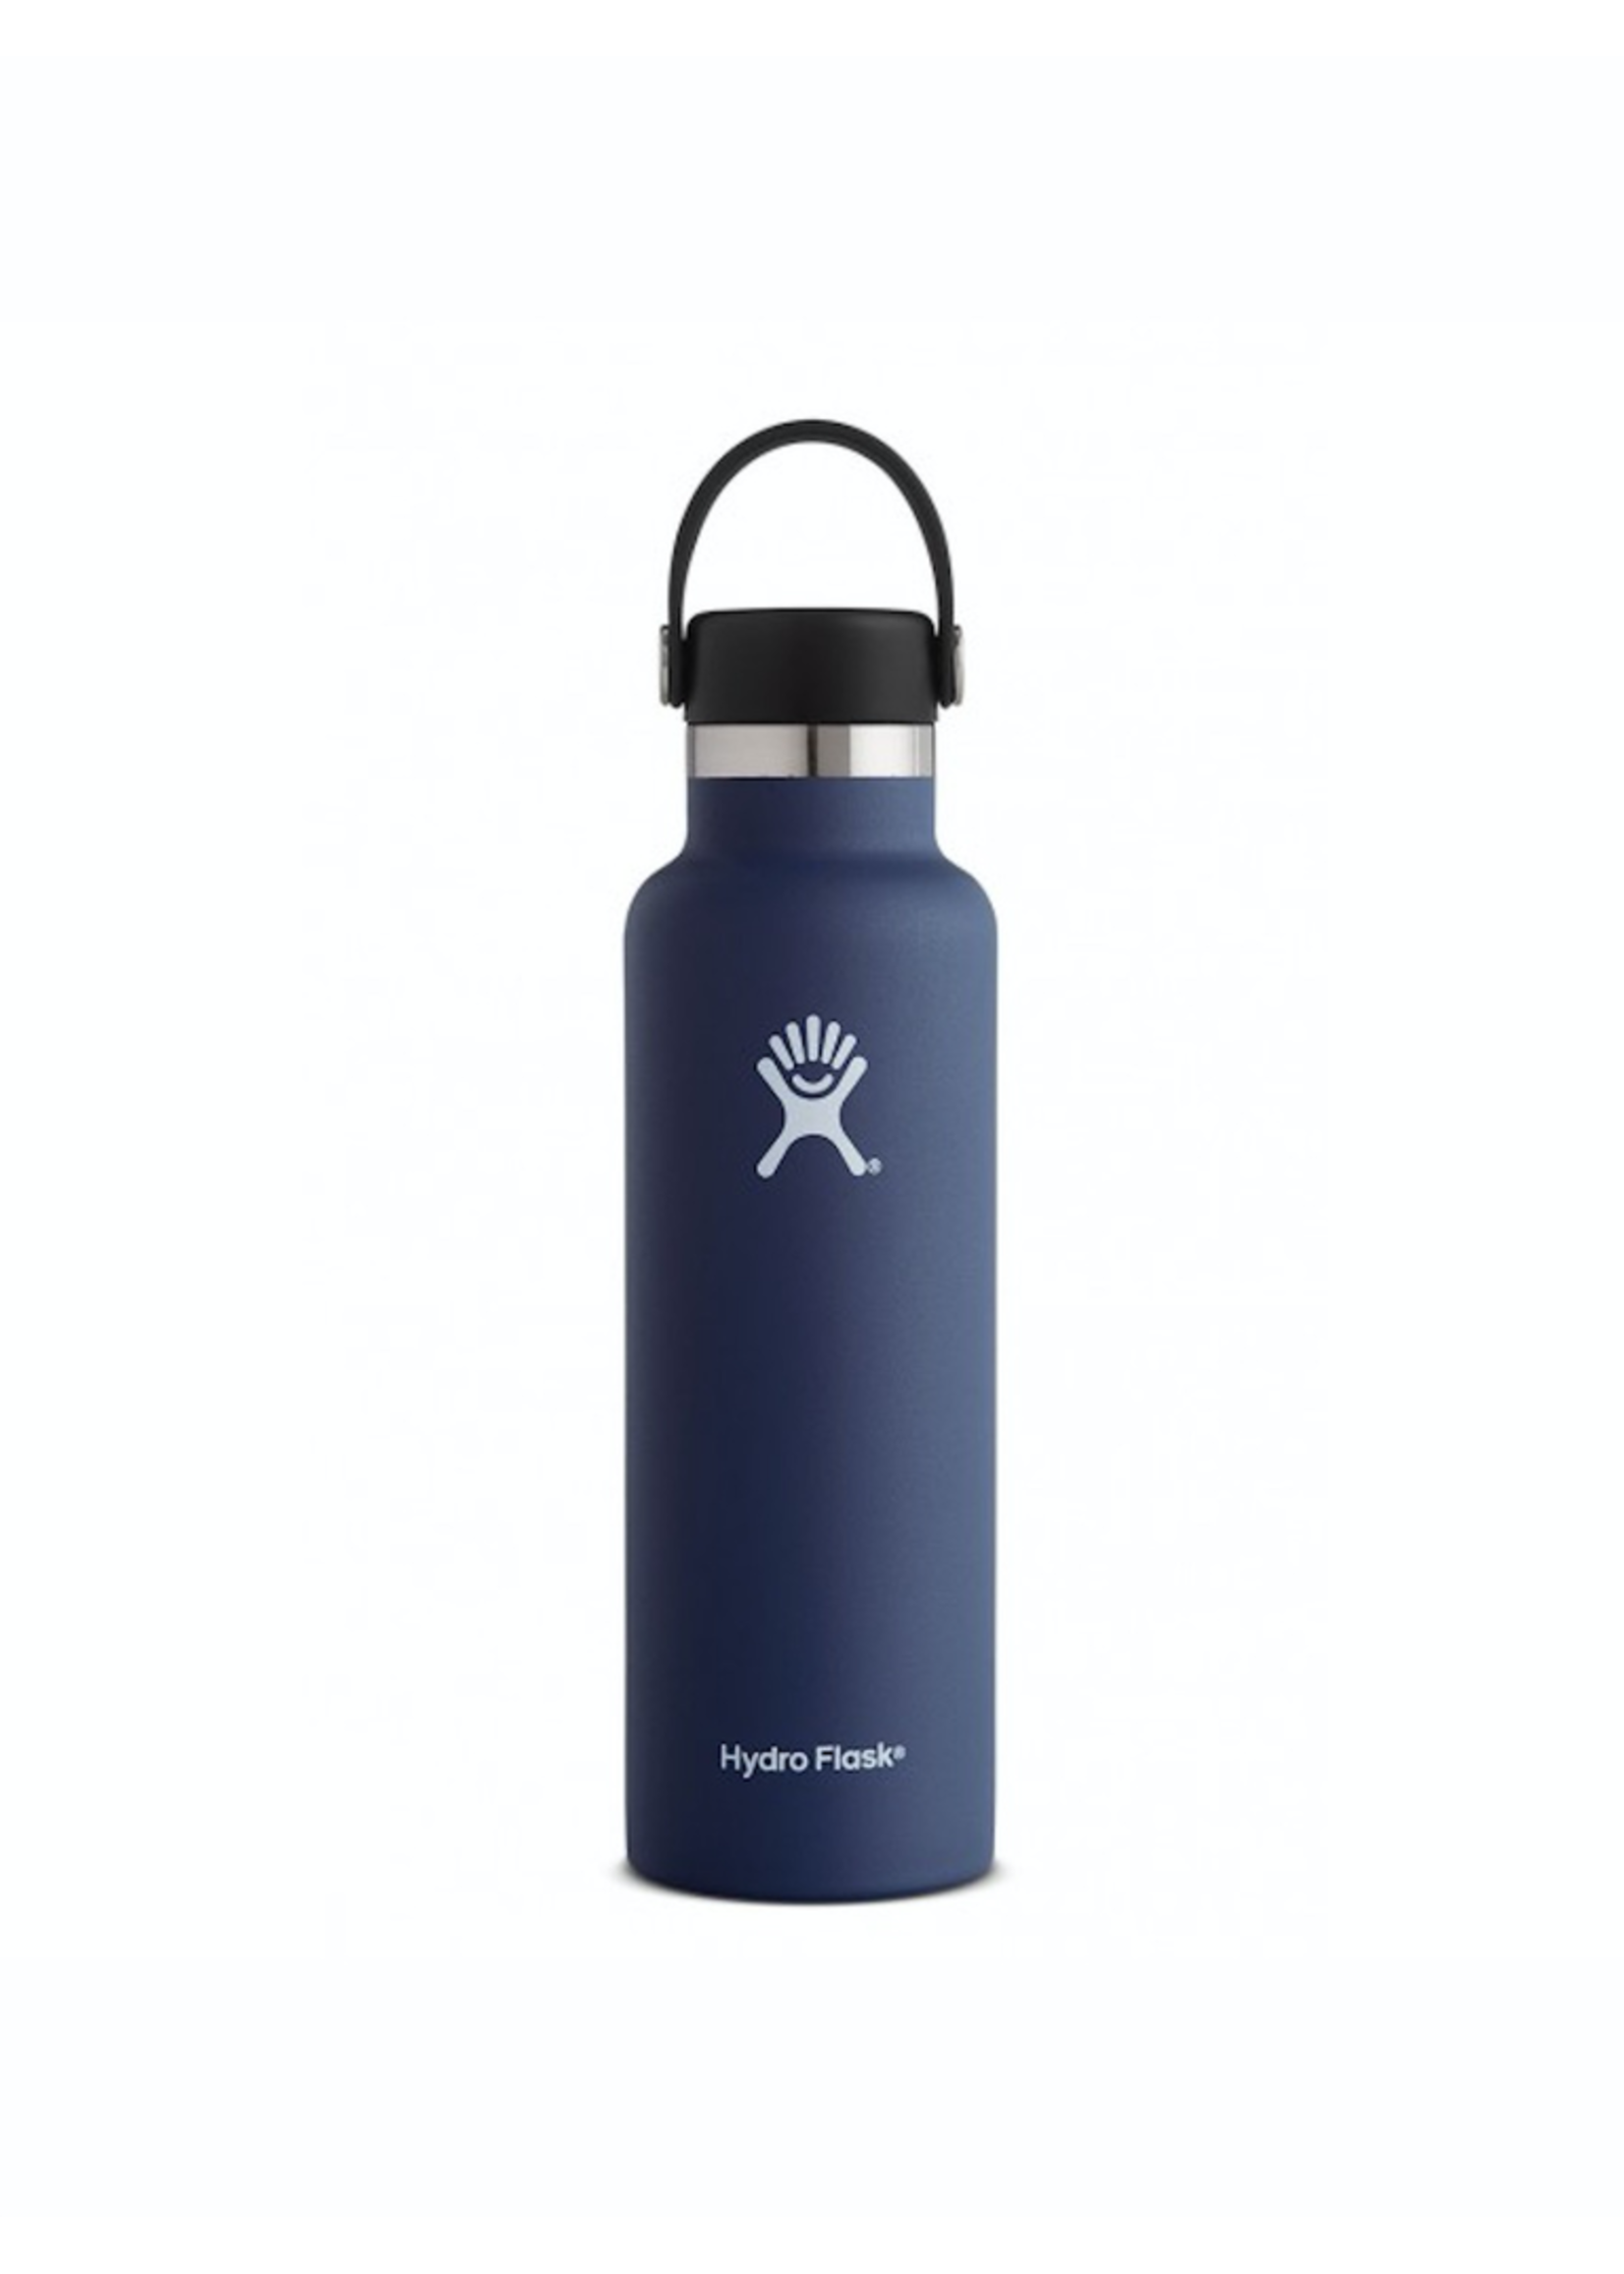 Hydro Flask Hydro Flask, 21 oz Standard Mouth Flex Cap Insulated Stainless Steel Bottle in Cobalt